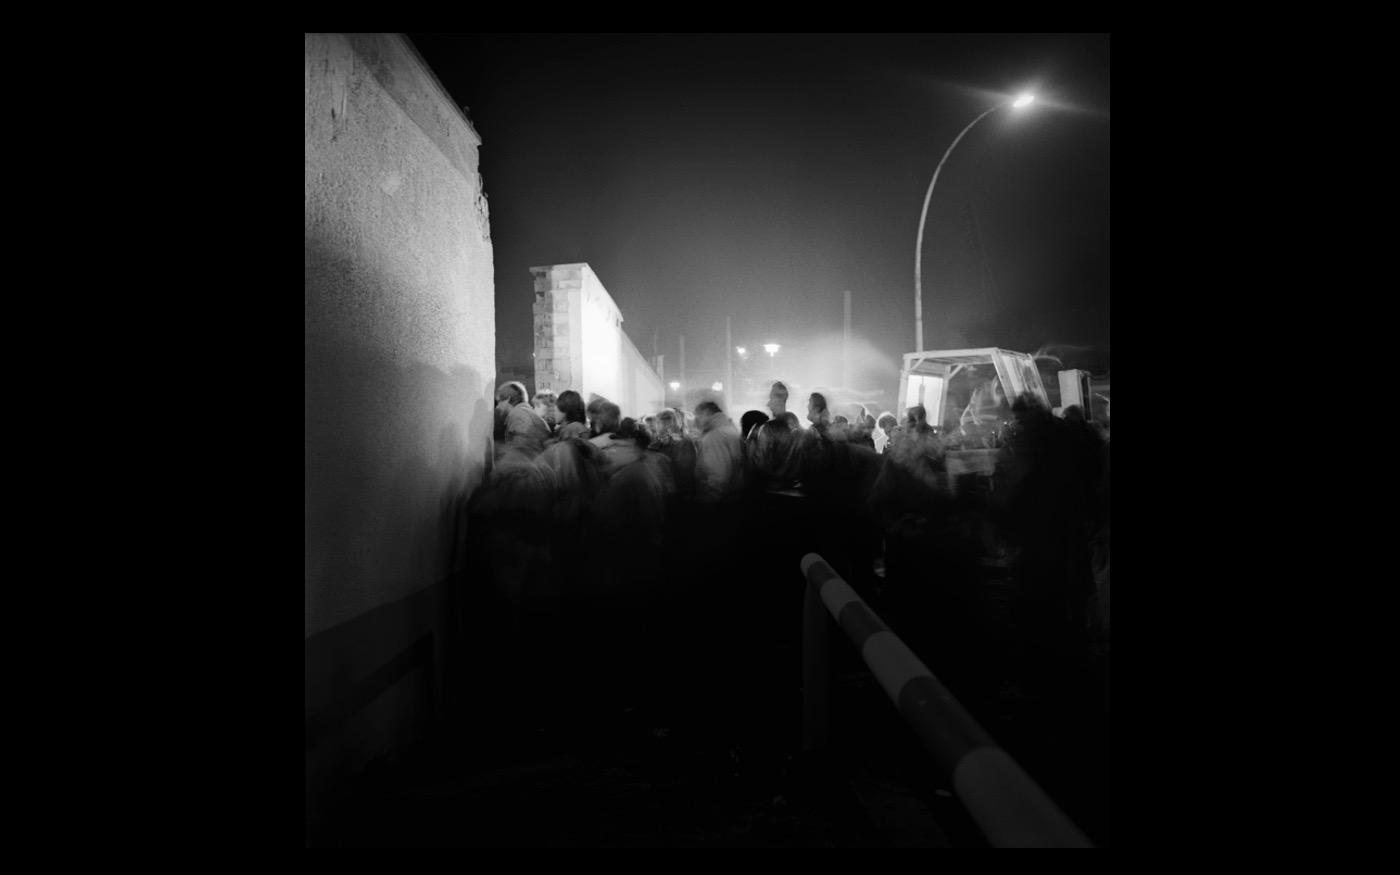 In November of 1989 the Berlin Wall opened up, and eventually reunited East and West Germany : Looking Back: 60 Years of Photographs : David Burnett | Photographer